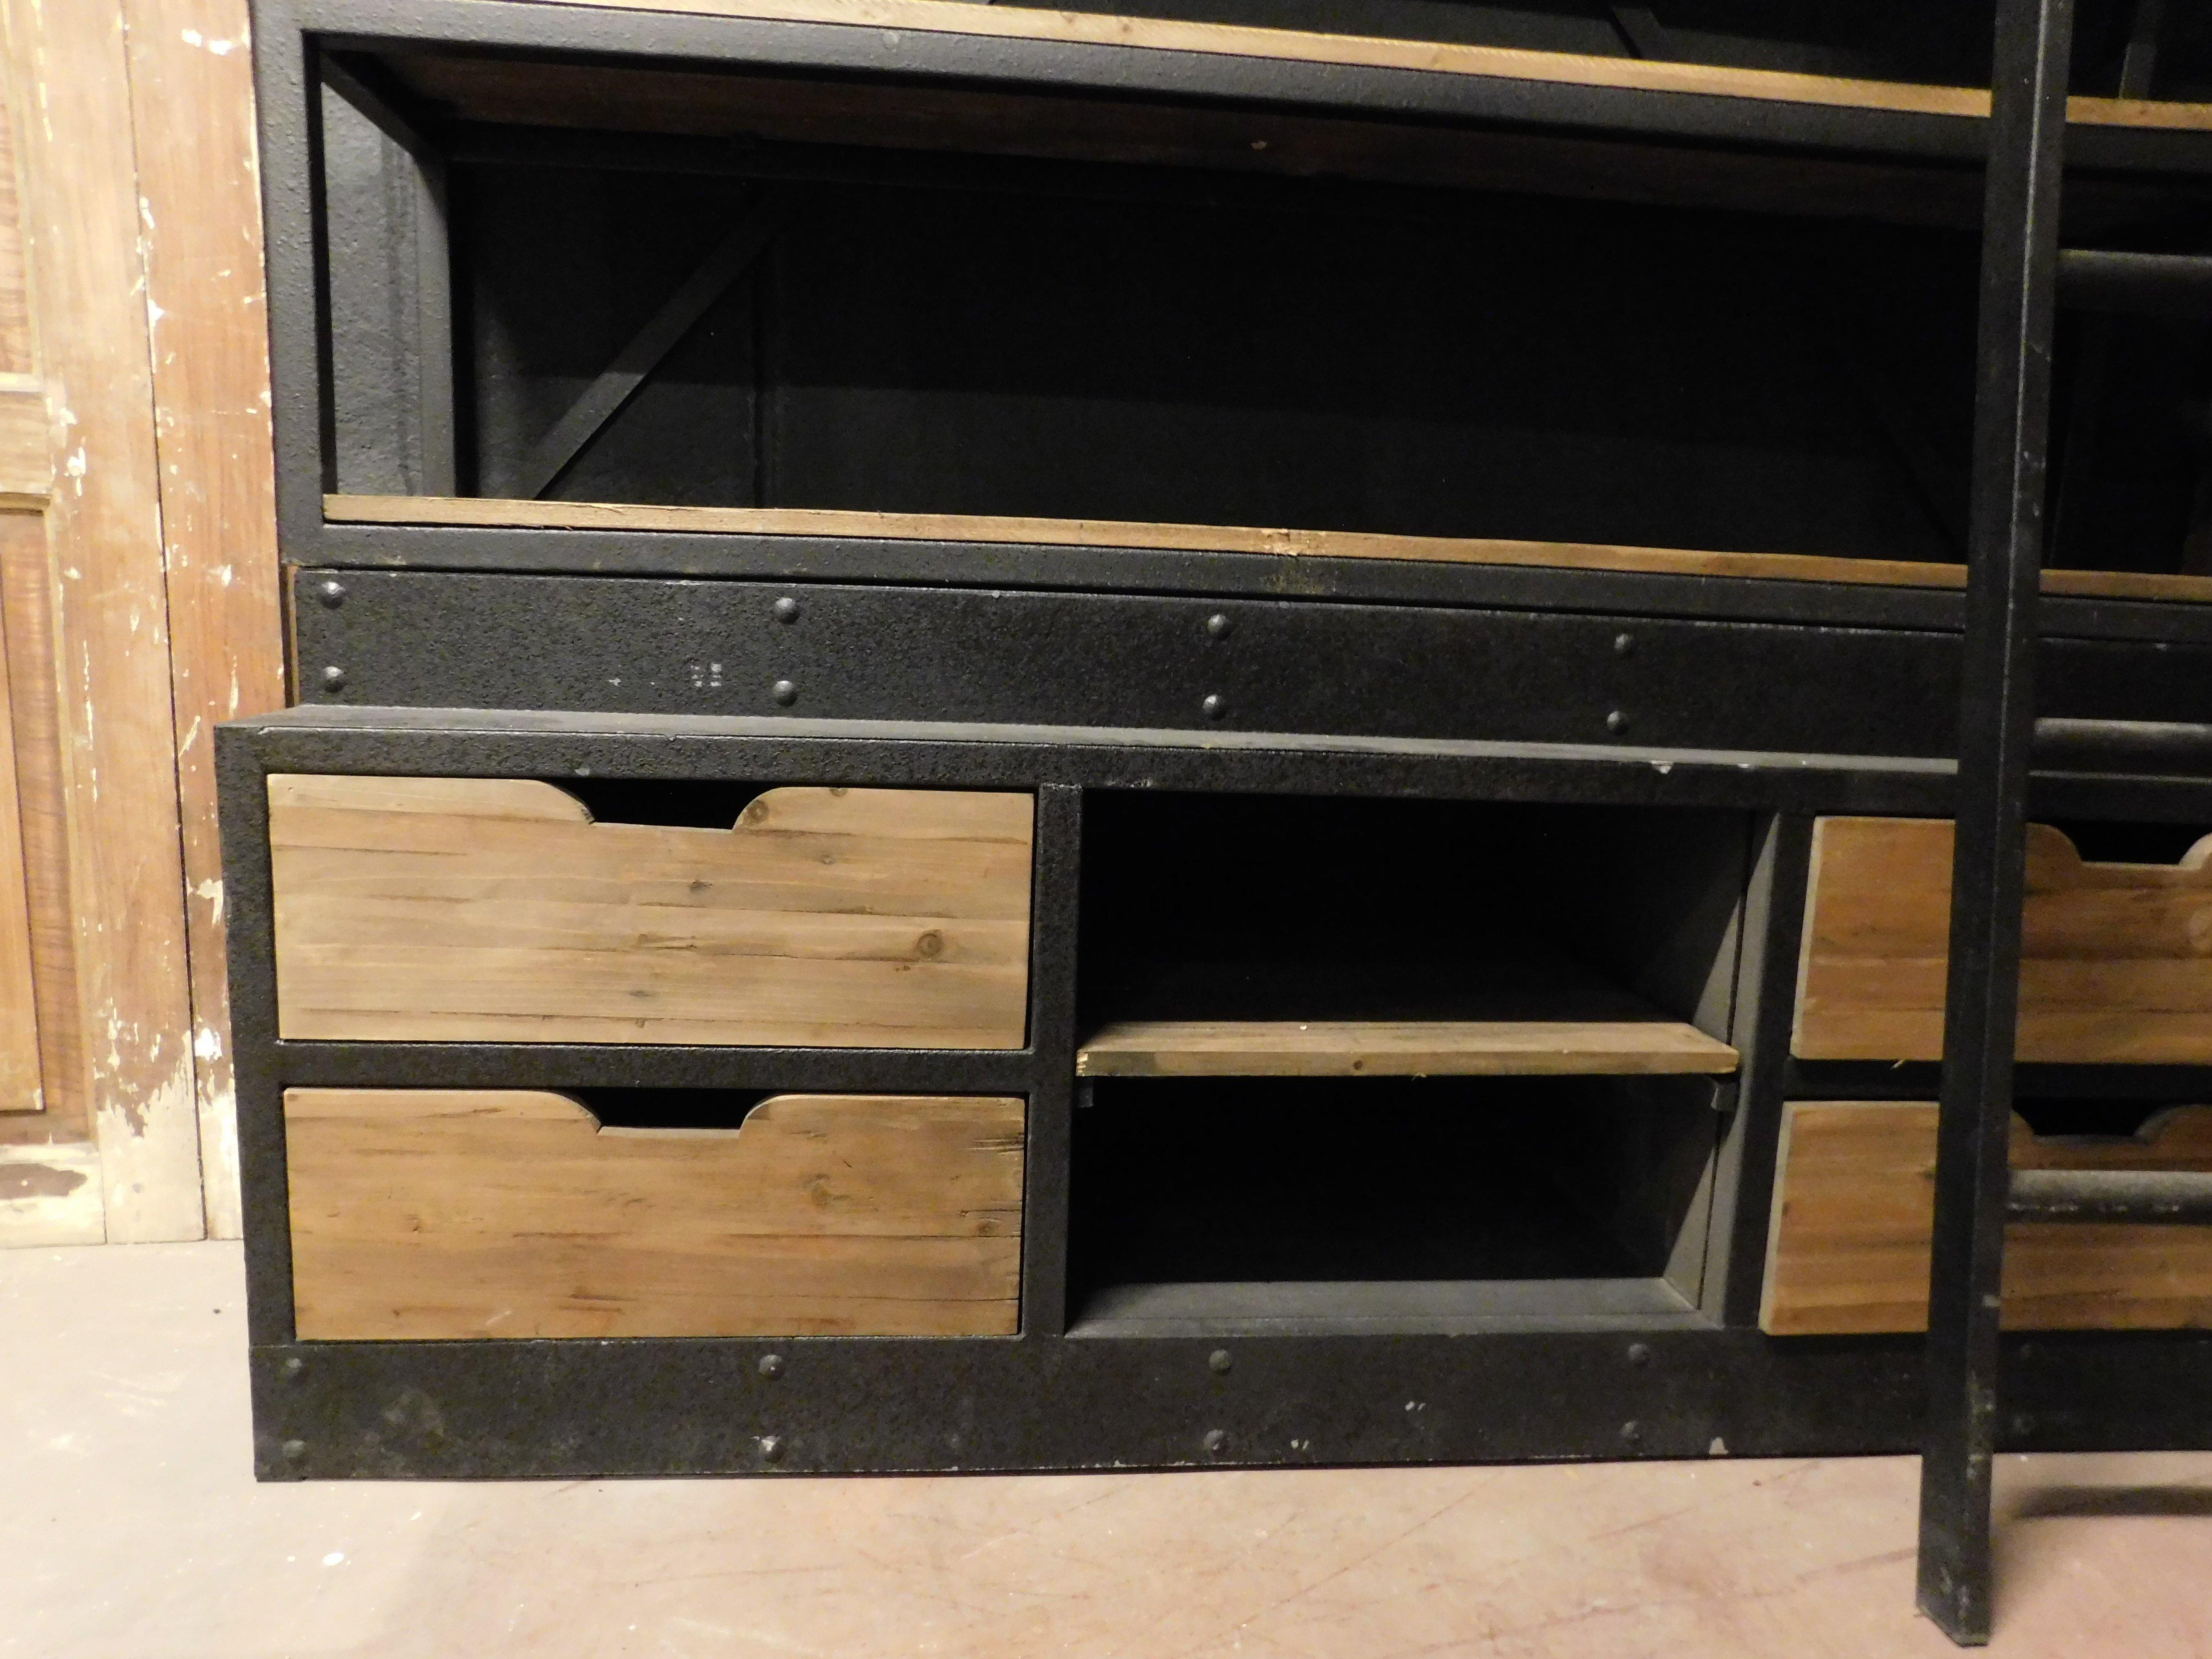 Iron Industrial iron bookcase with wooden shelves and drawers complete with ladder For Sale